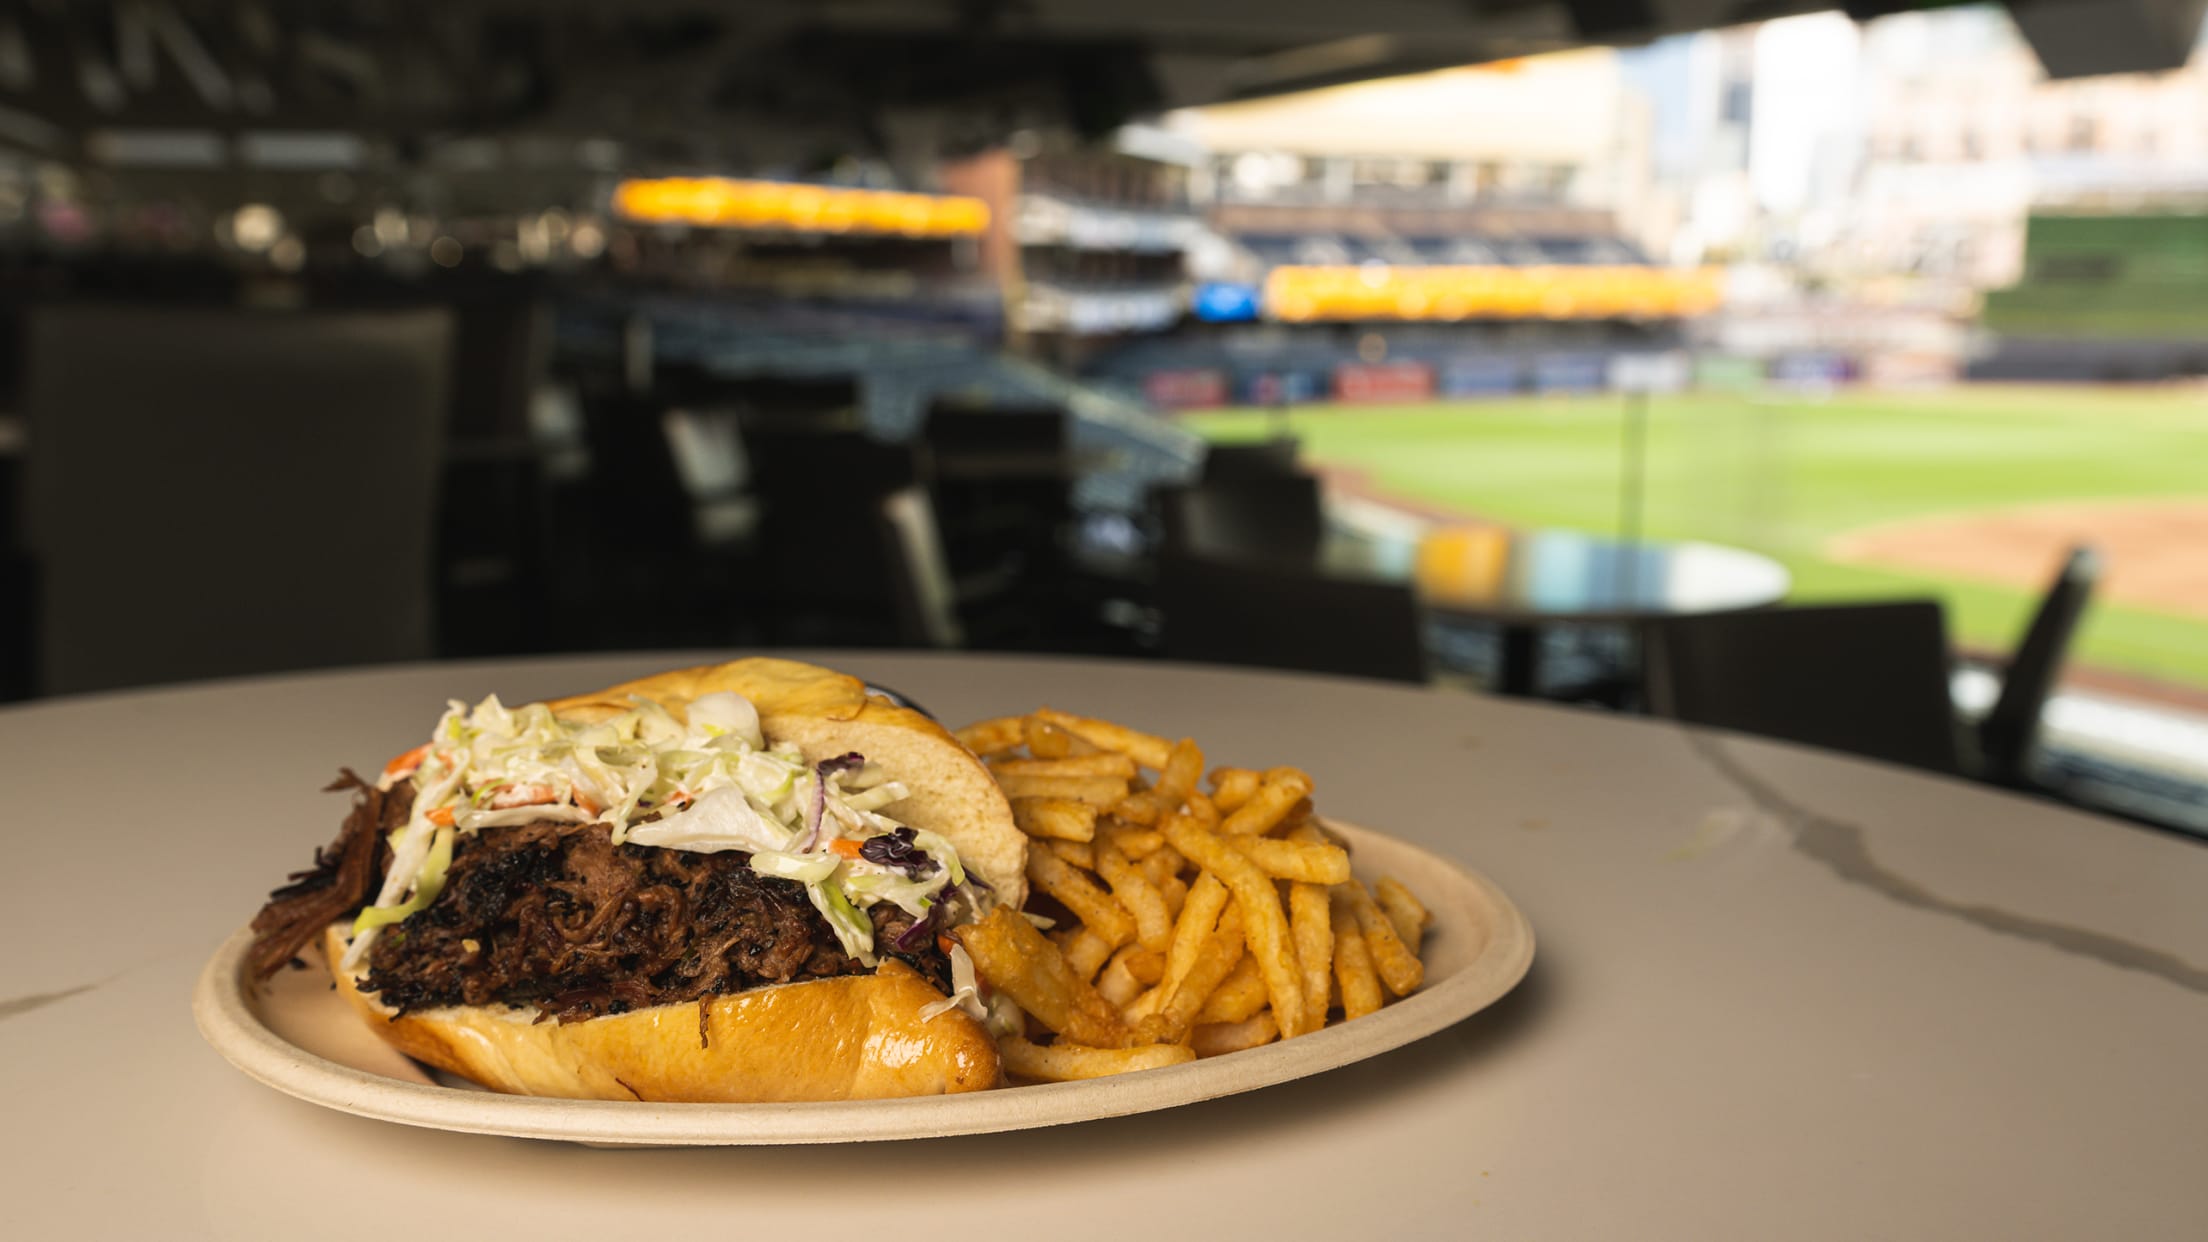 Petco Park Food Guide - Fun Diego Family